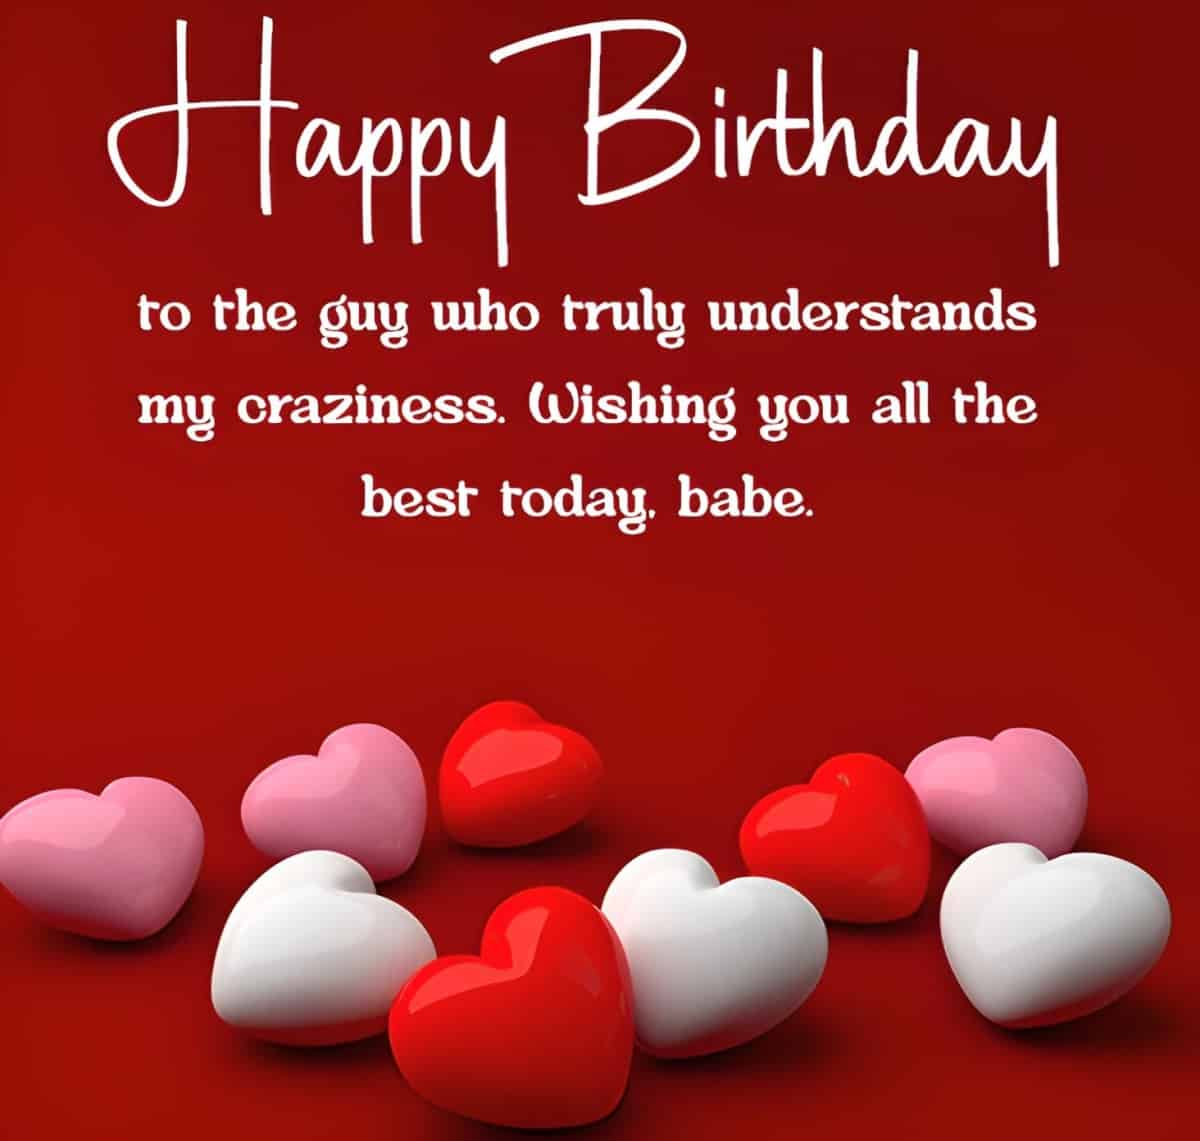 Happy Birthday Messages and Wishes for Boyfriends